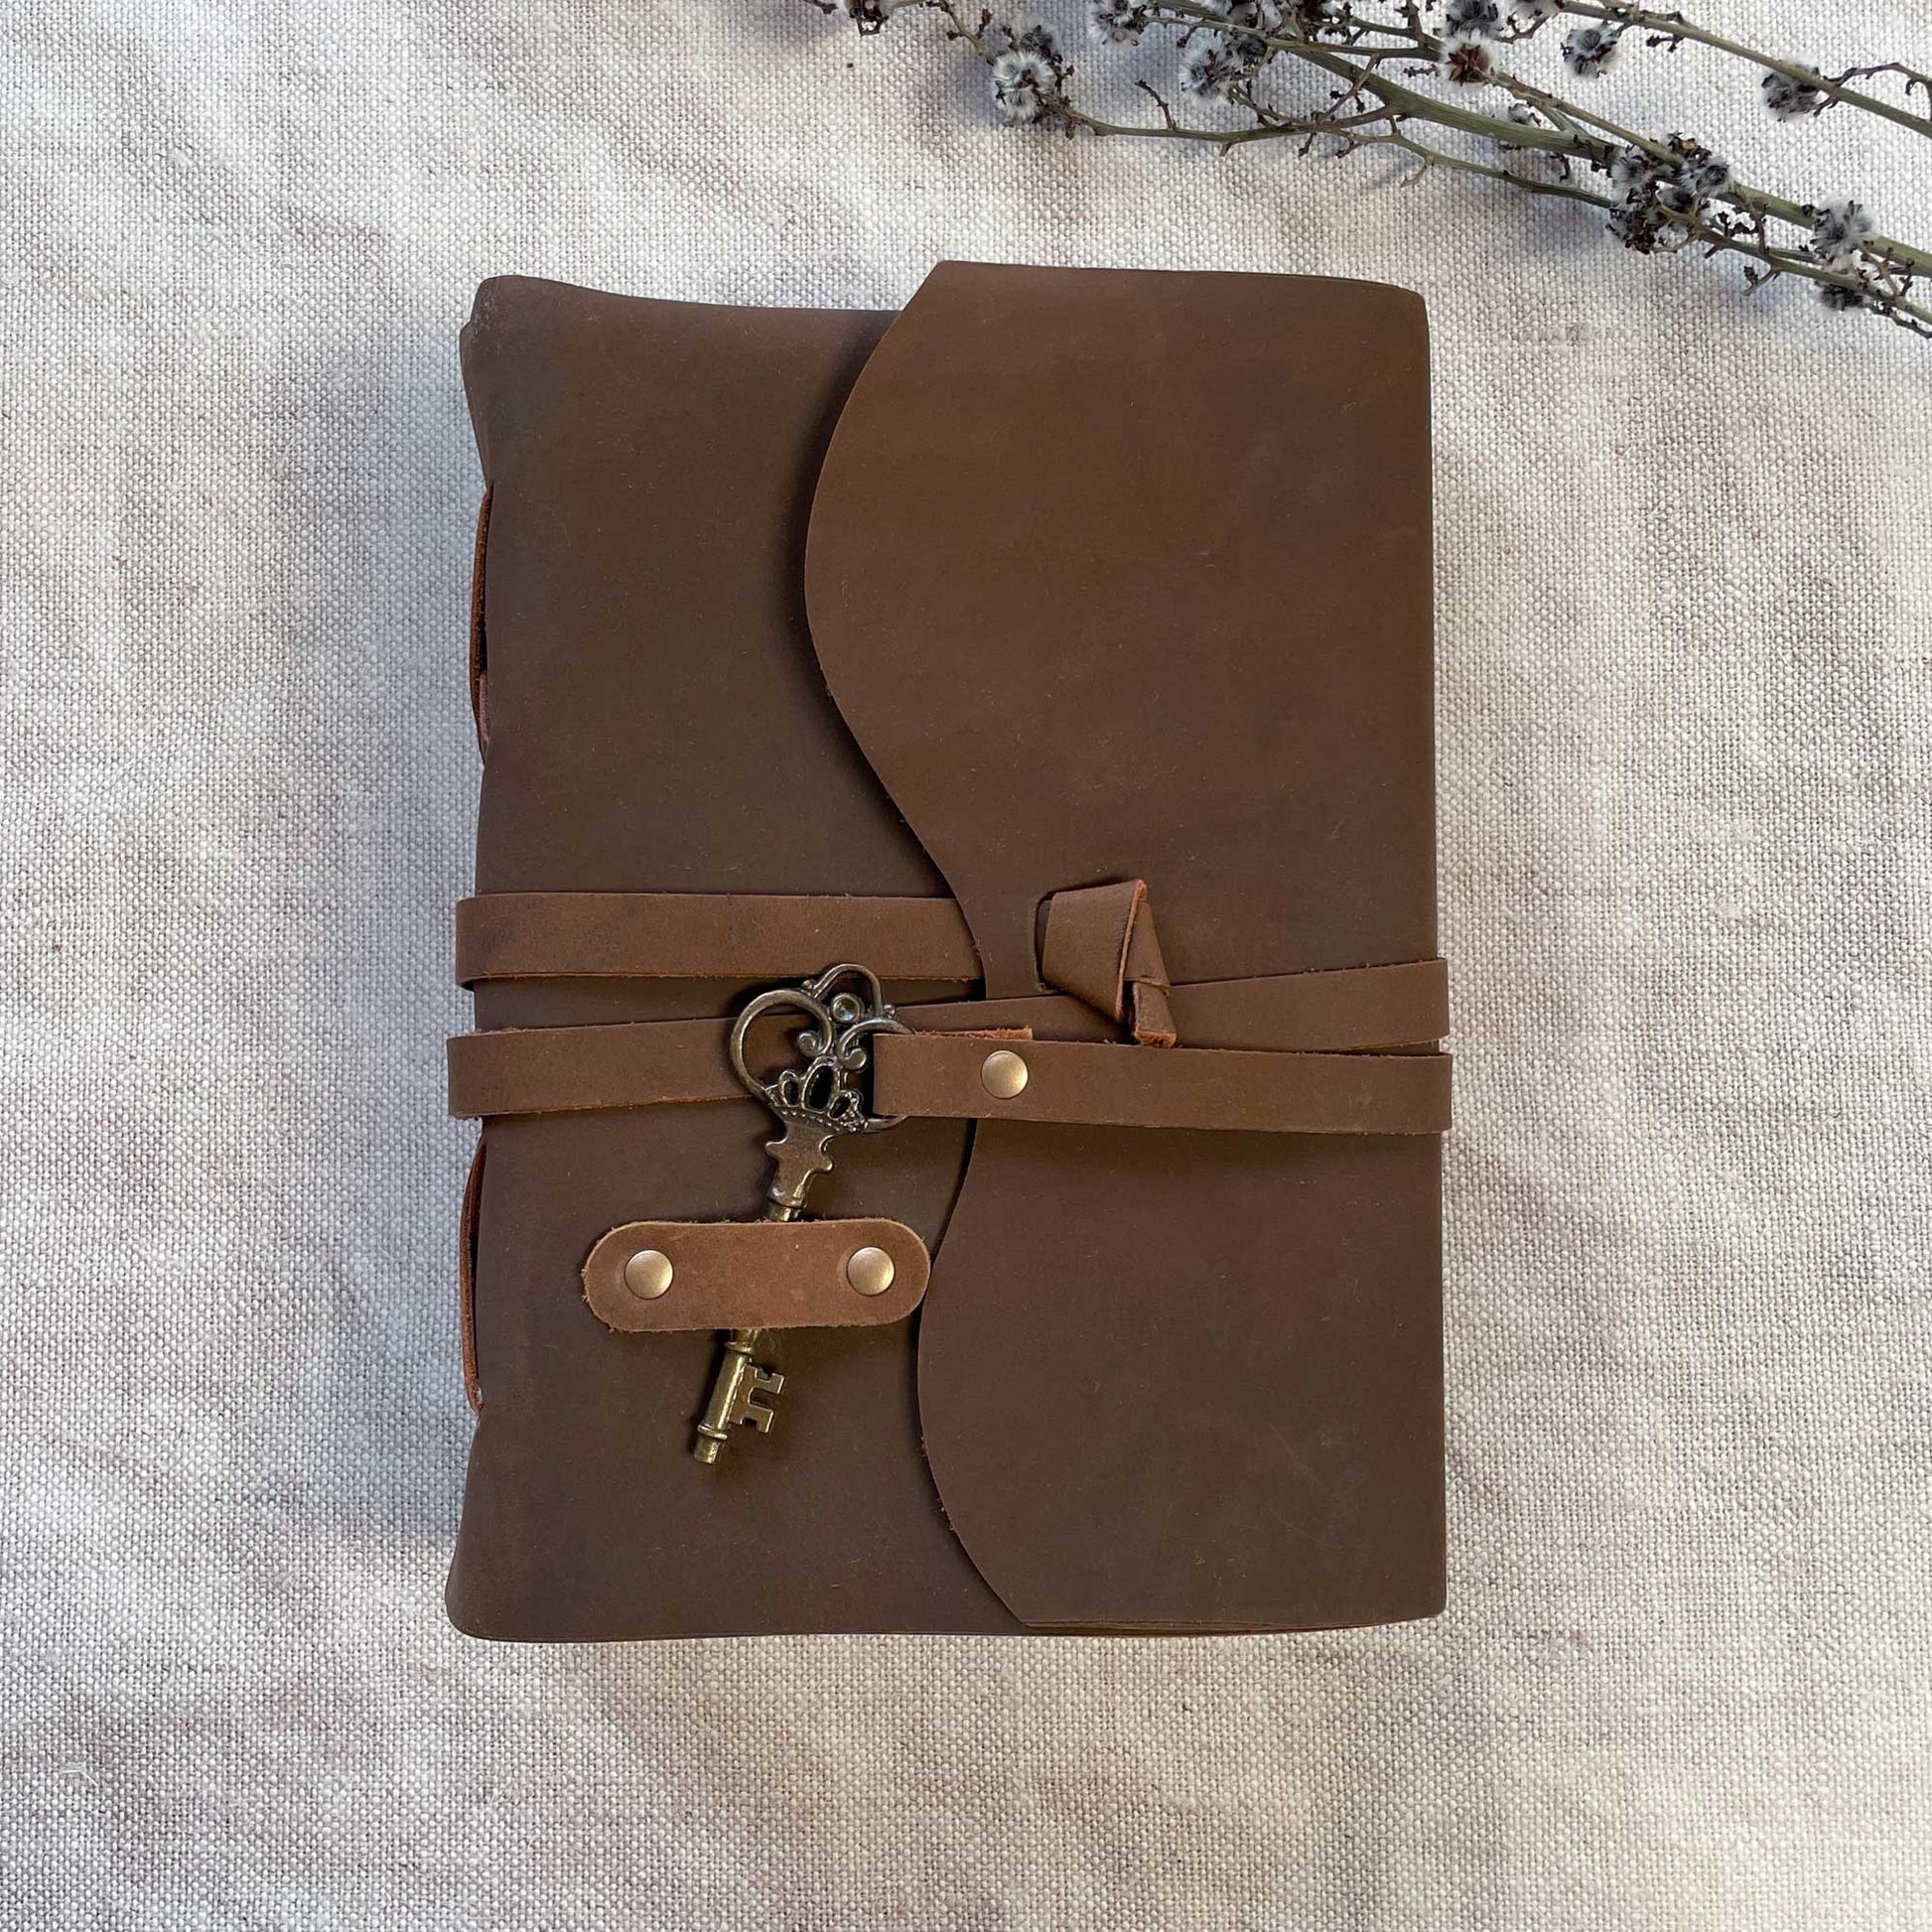 Leather cover notebook with key and loop fastening.  Handmade cotton rag paper journal with brown leather cover.